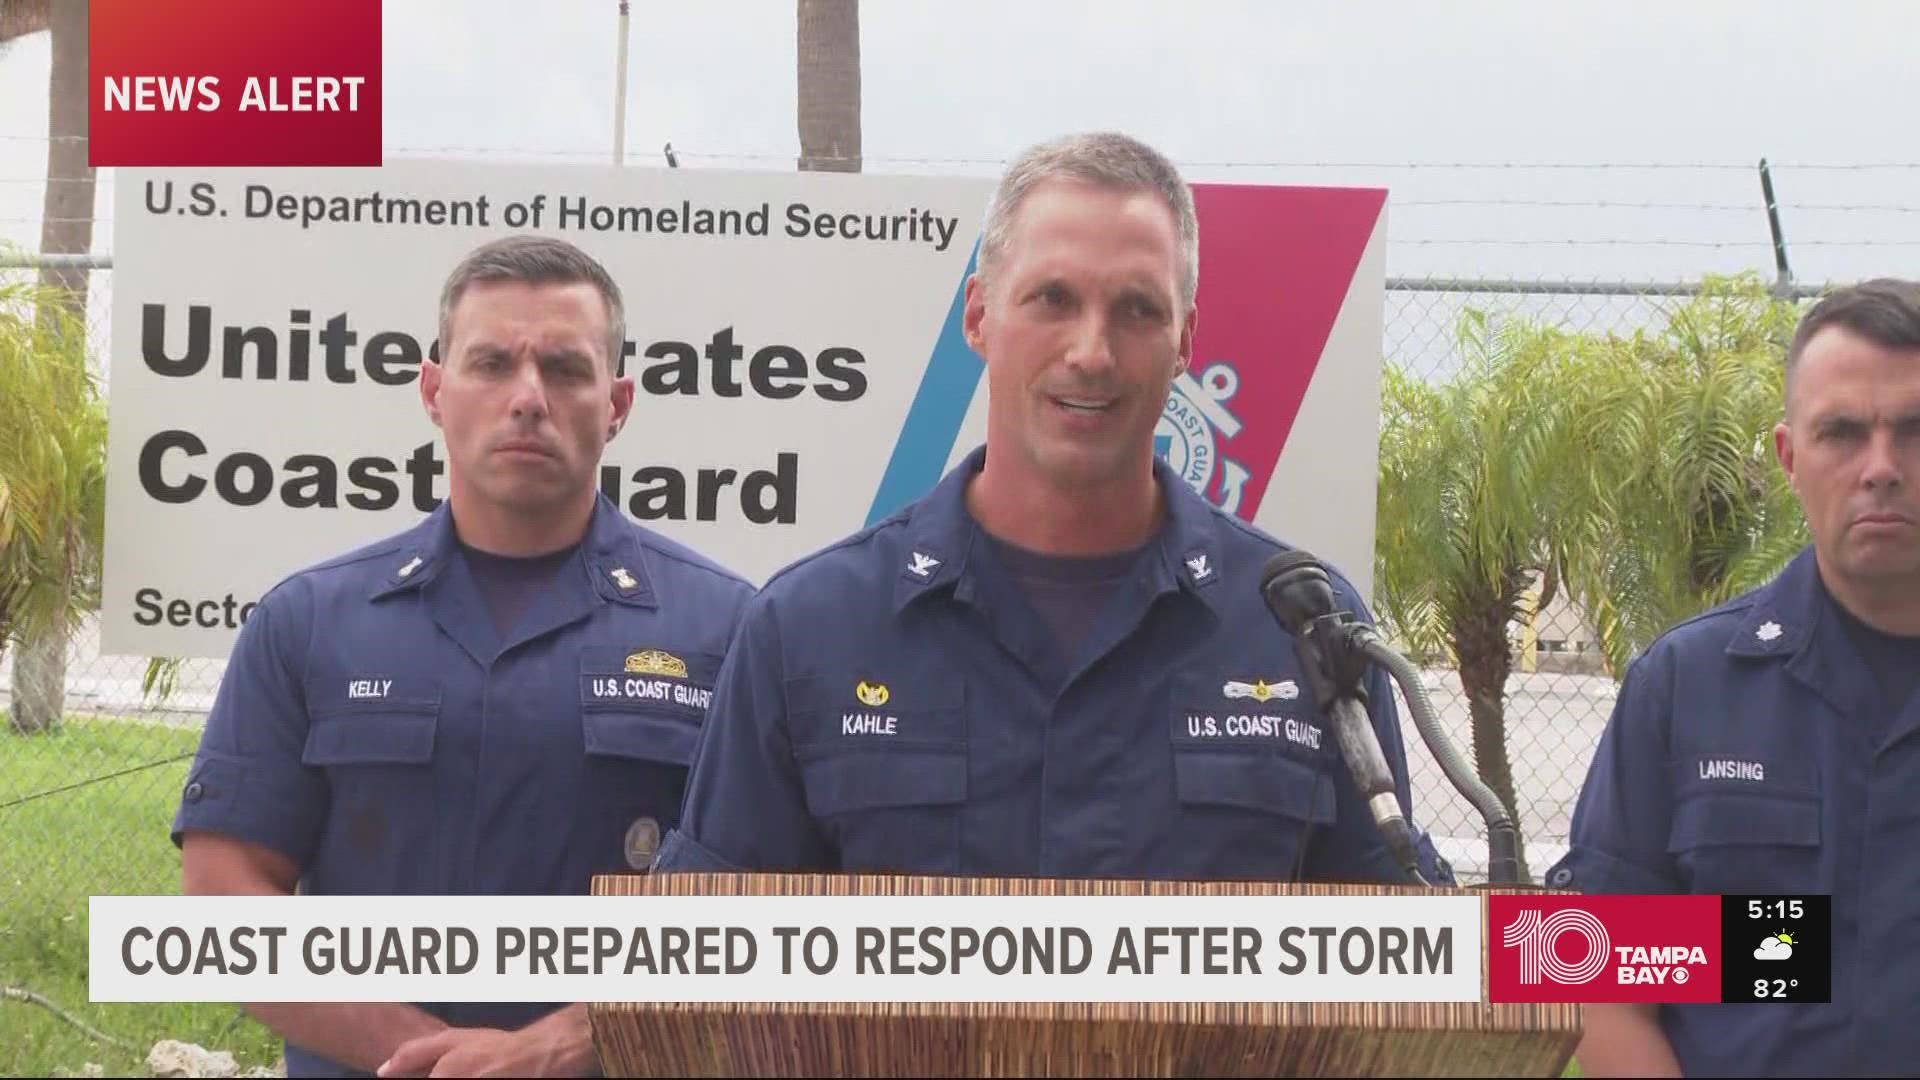 The U.S. Coast Guard said they will not be able to help everyone when the storm impacts people in Florida.